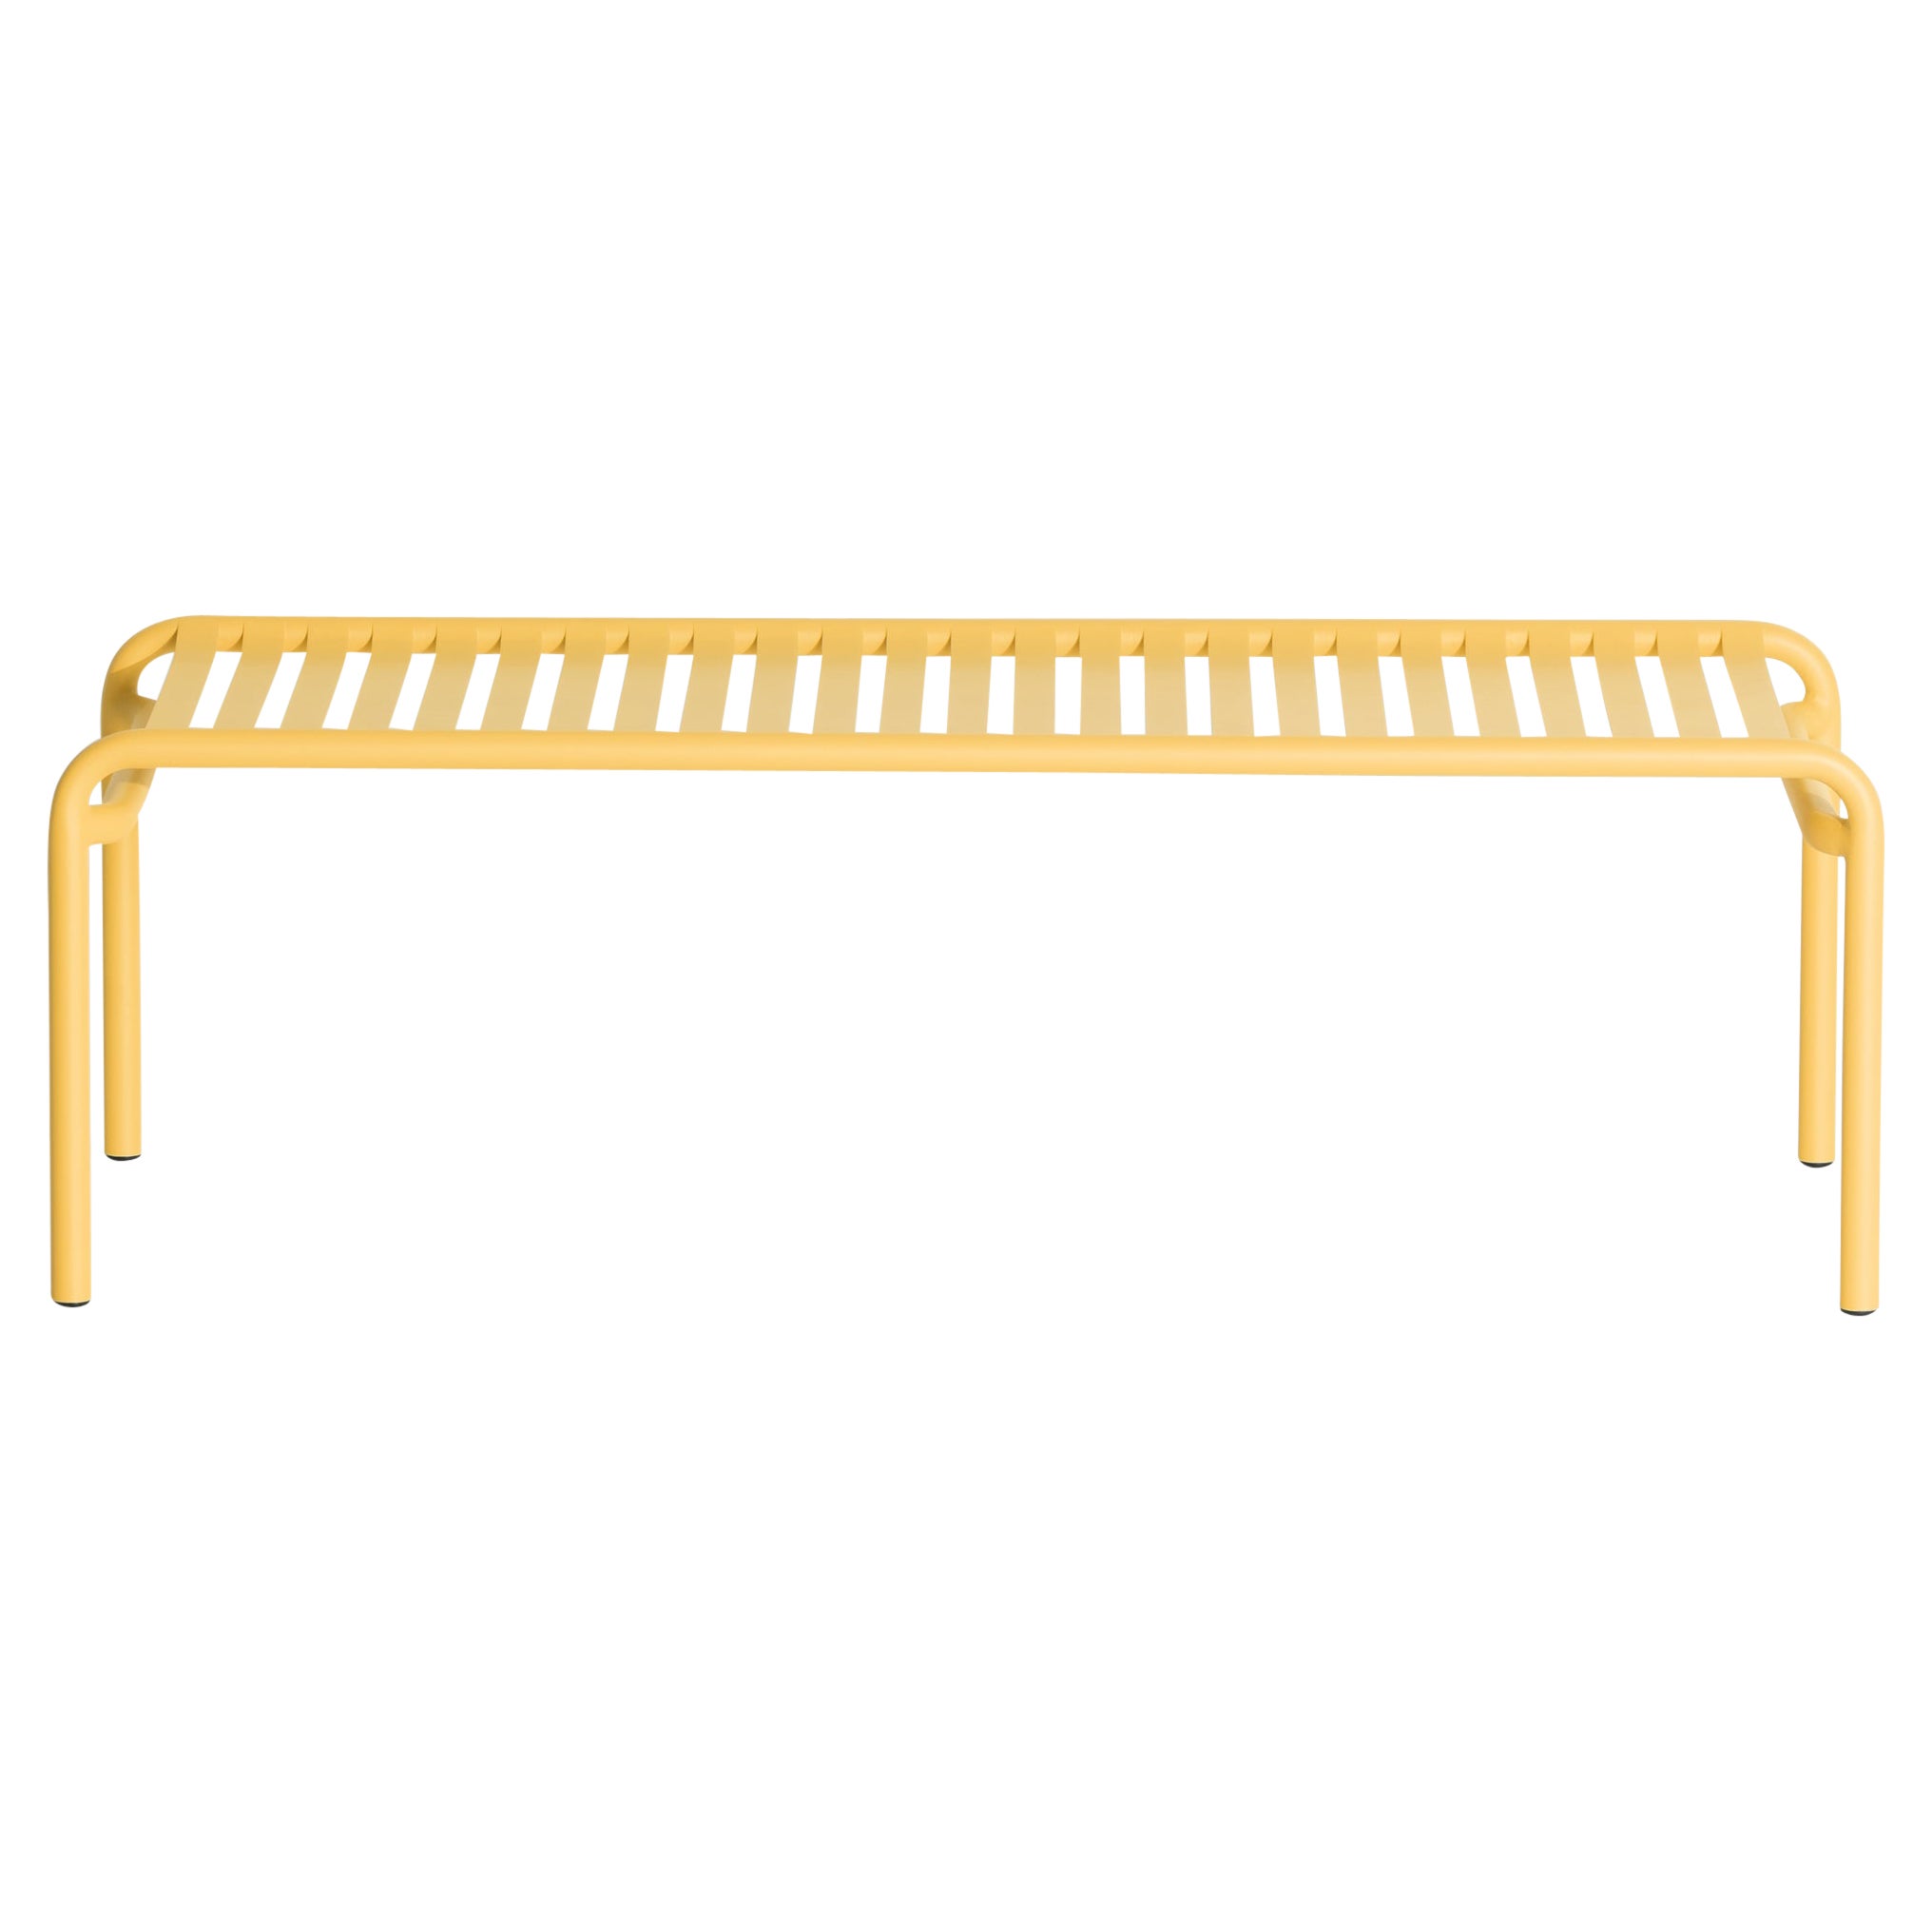 Petite Friture Week-End Long Coffee Table in Saffron Aluminium, 2017 For Sale